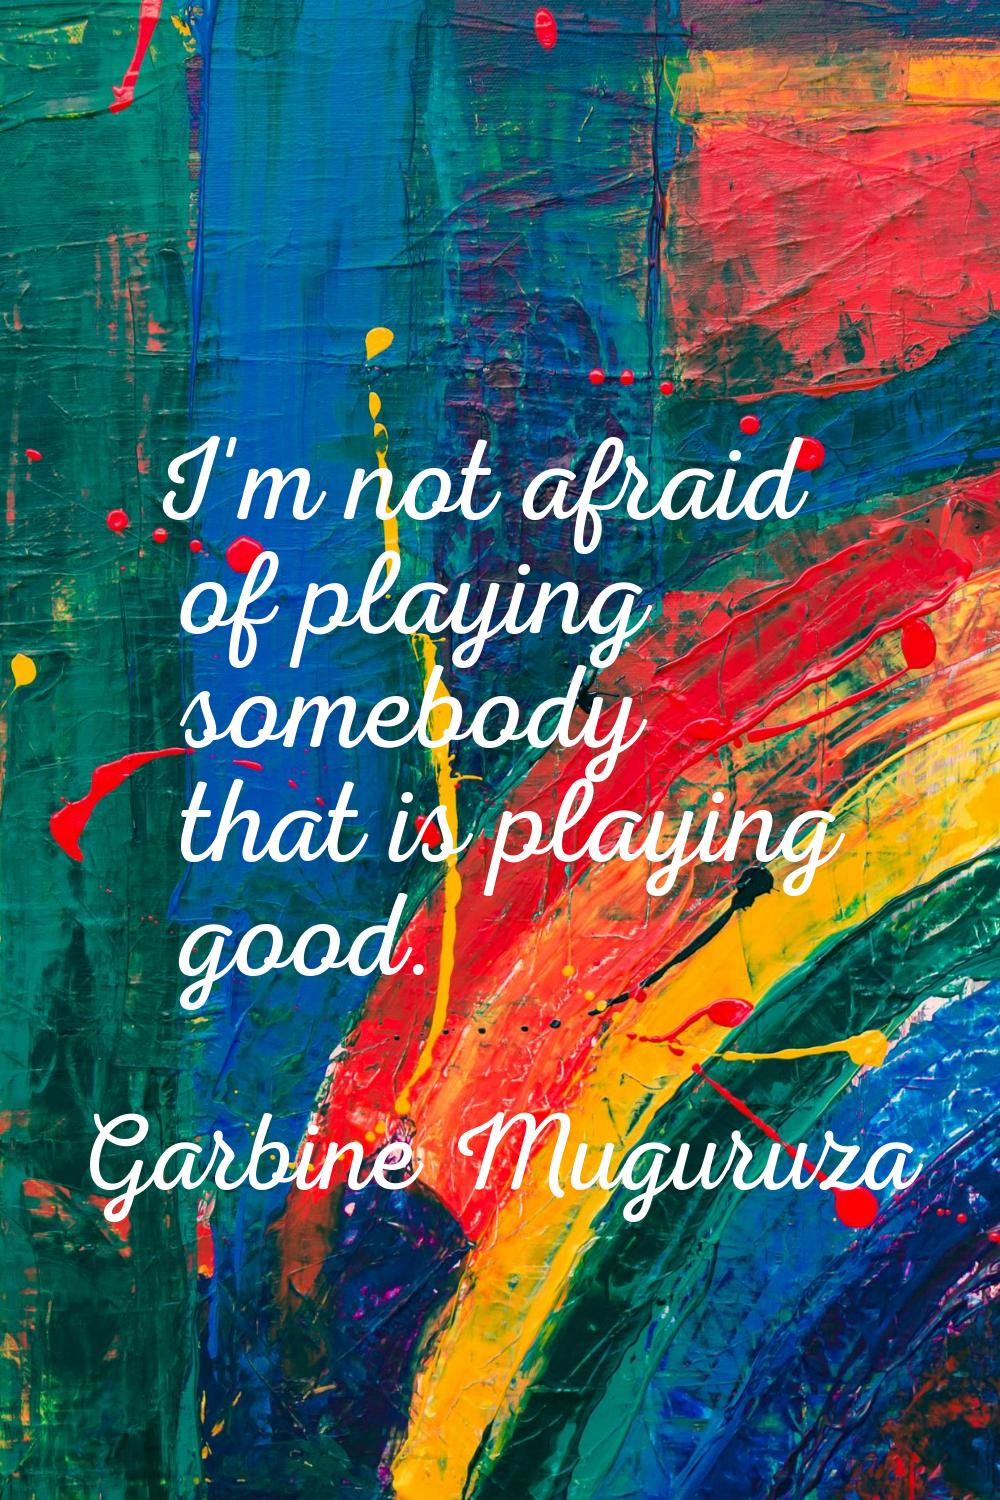 I'm not afraid of playing somebody that is playing good.